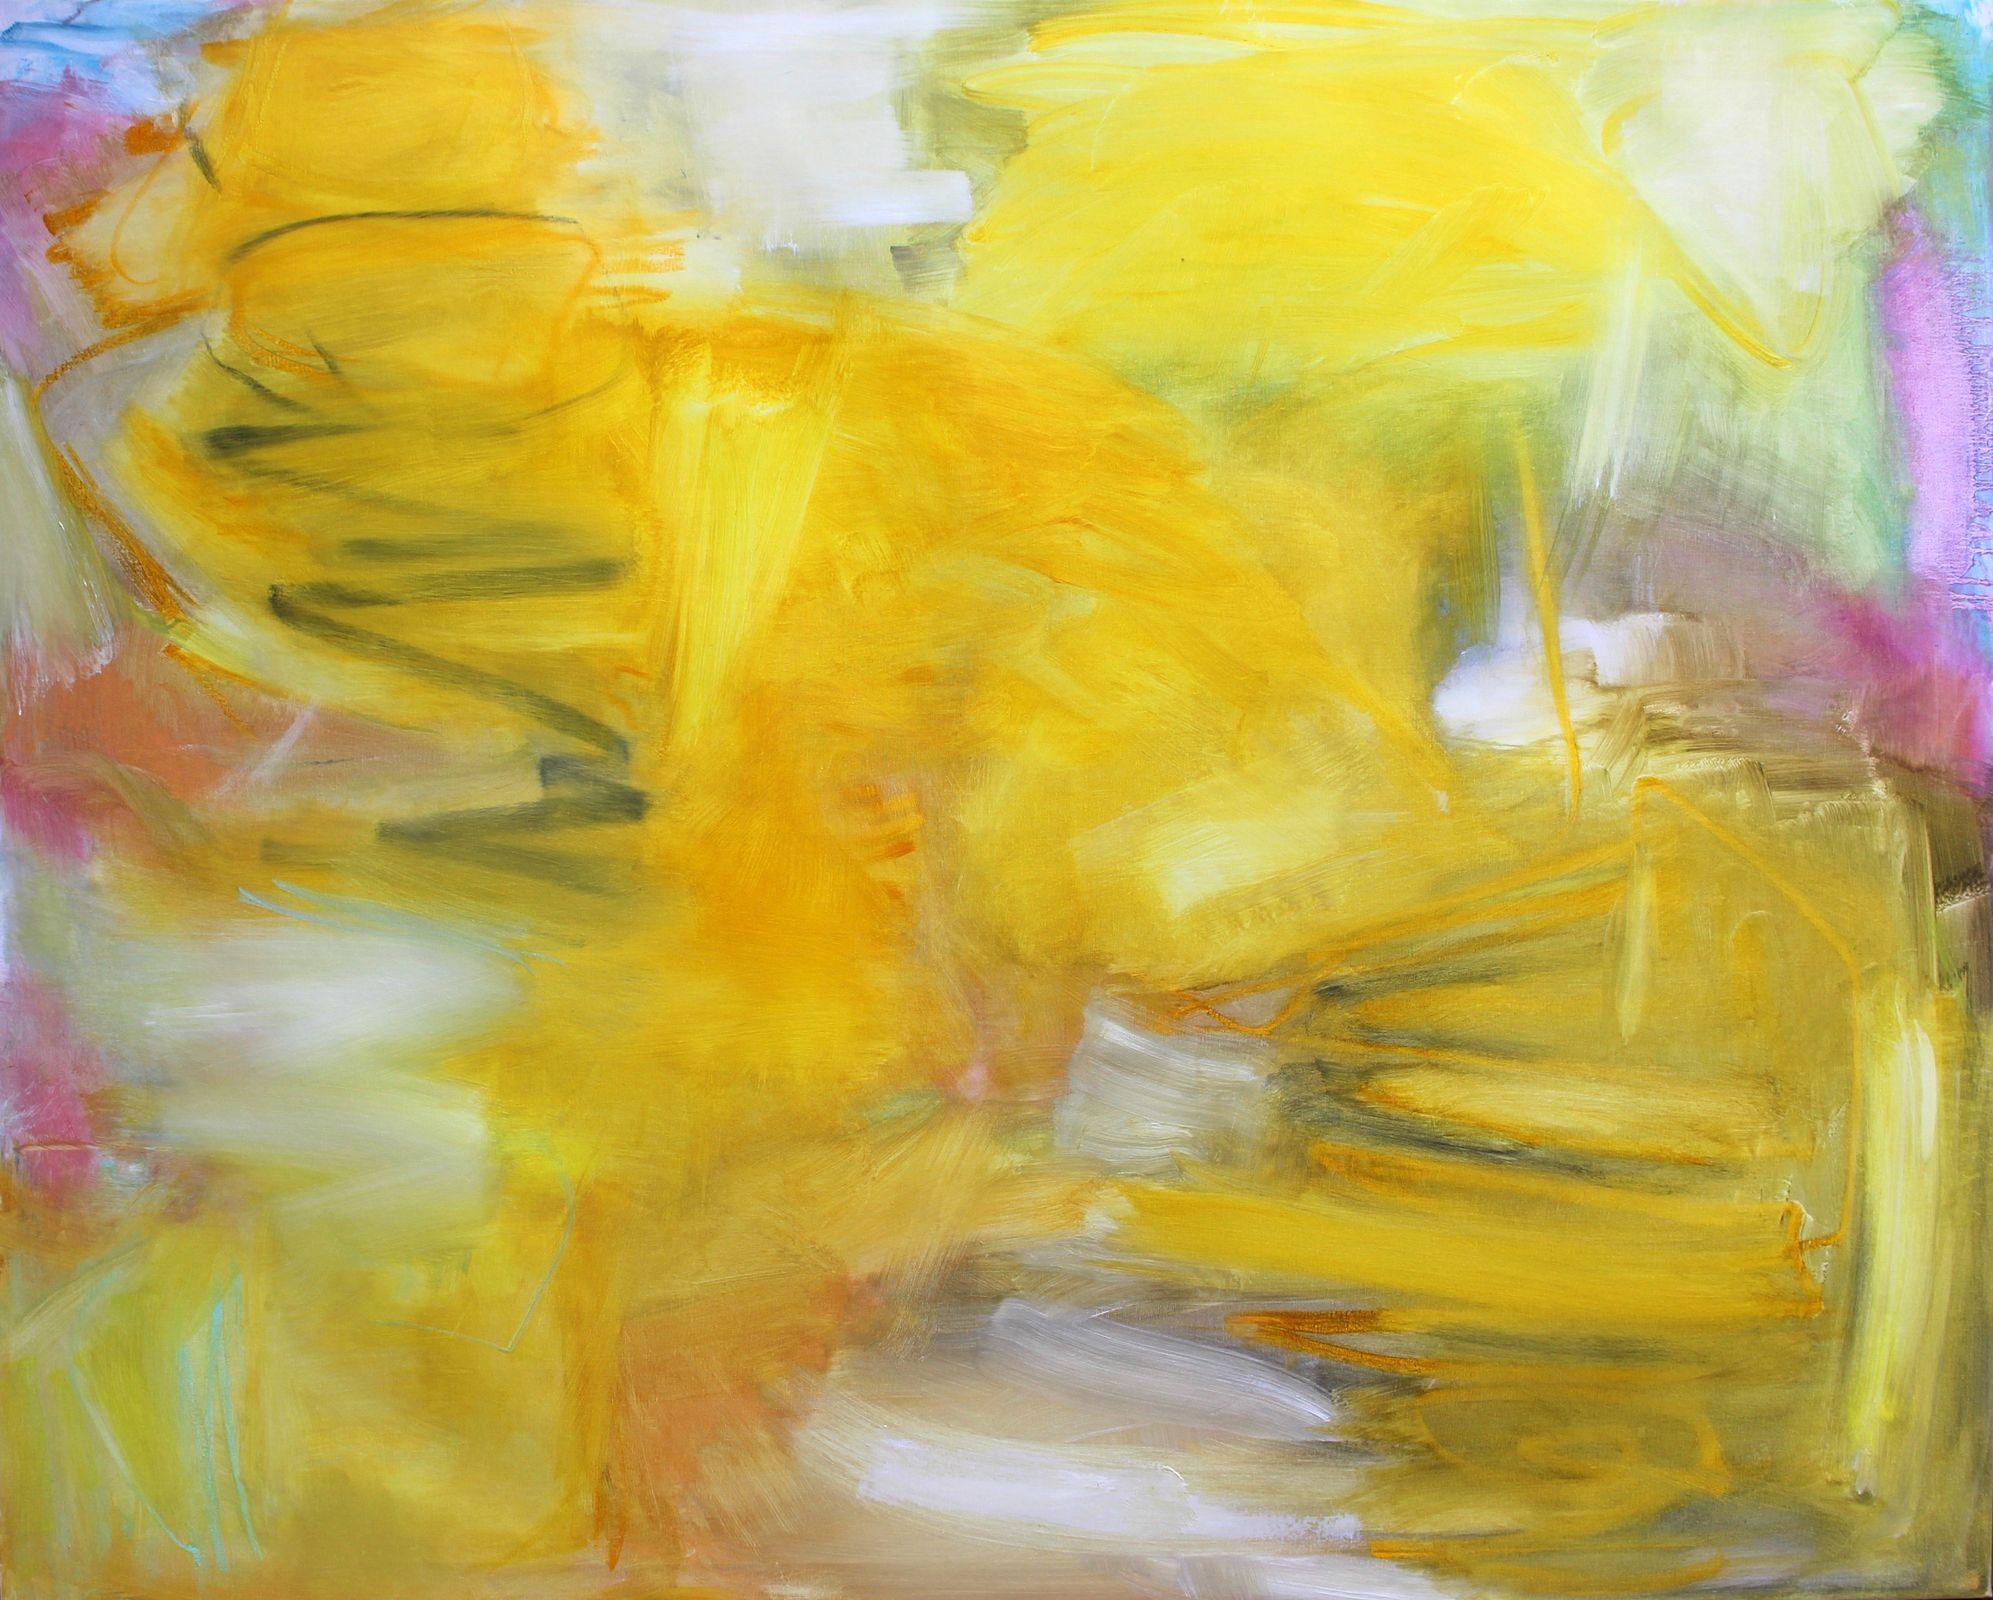 Trixie Pitts Abstract Painting - Golden Hills, Painting, Oil on Canvas